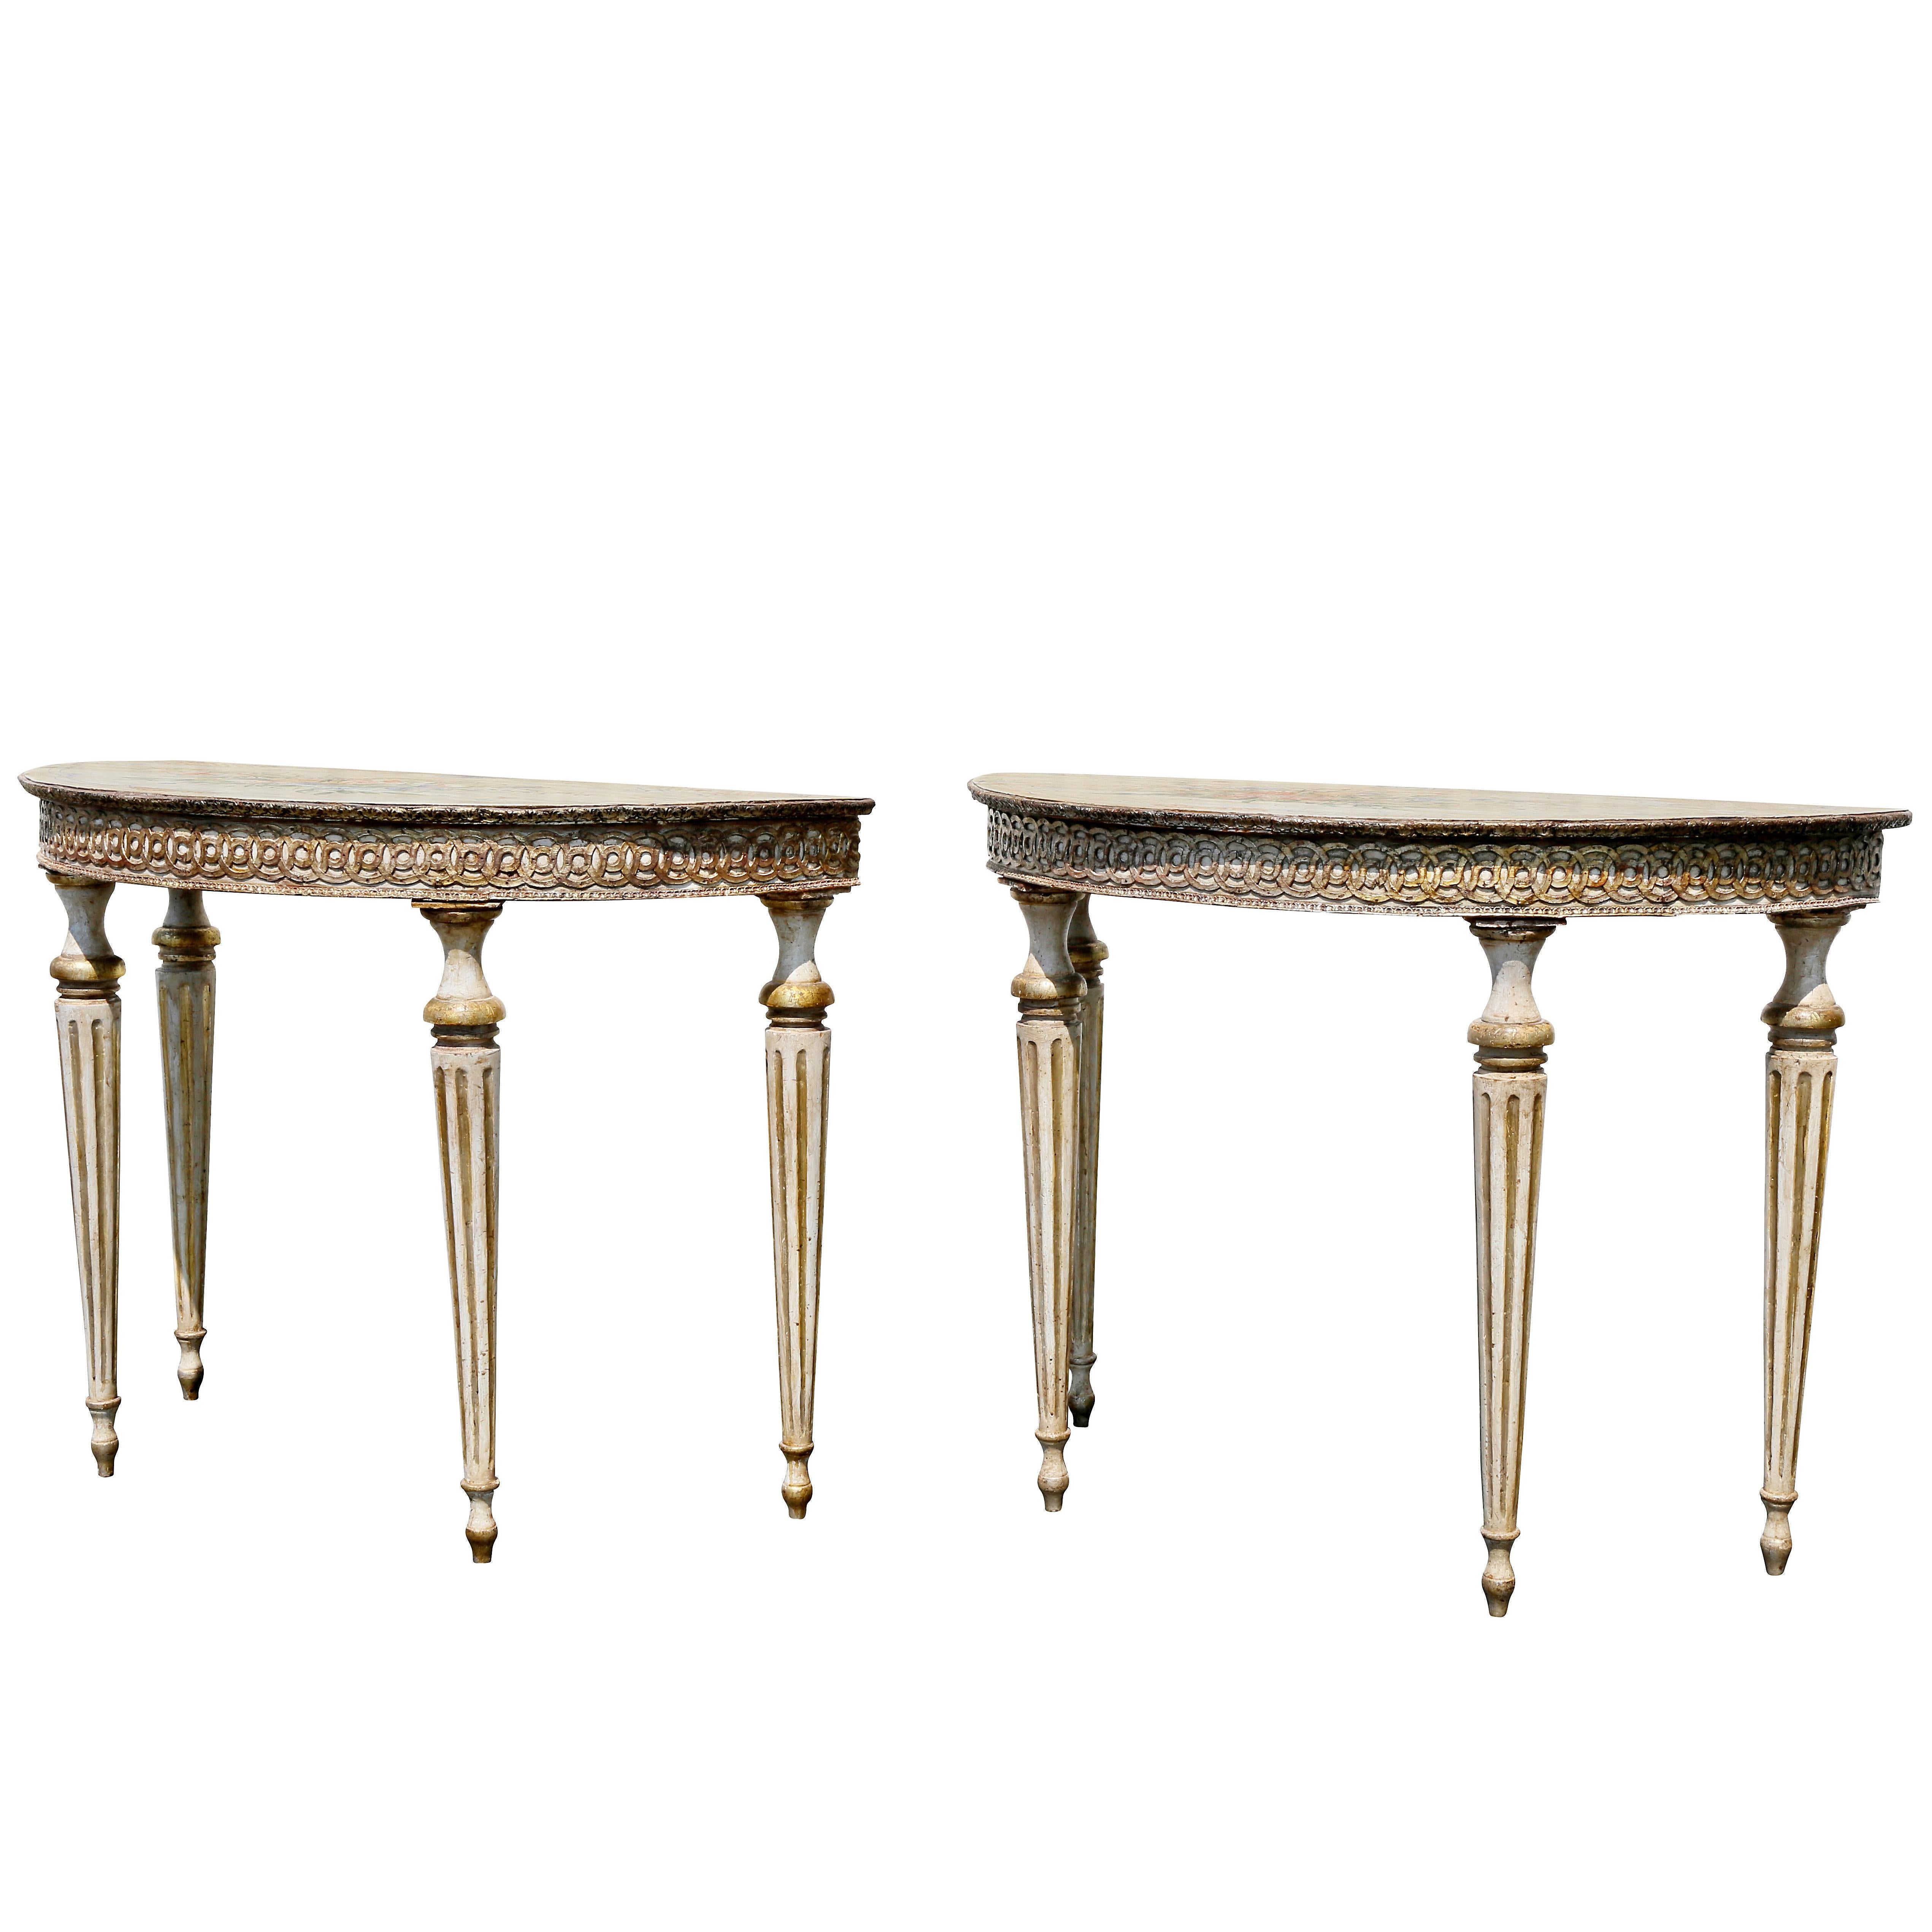 Pair of Italian Neoclassic Style Painted Console Tables